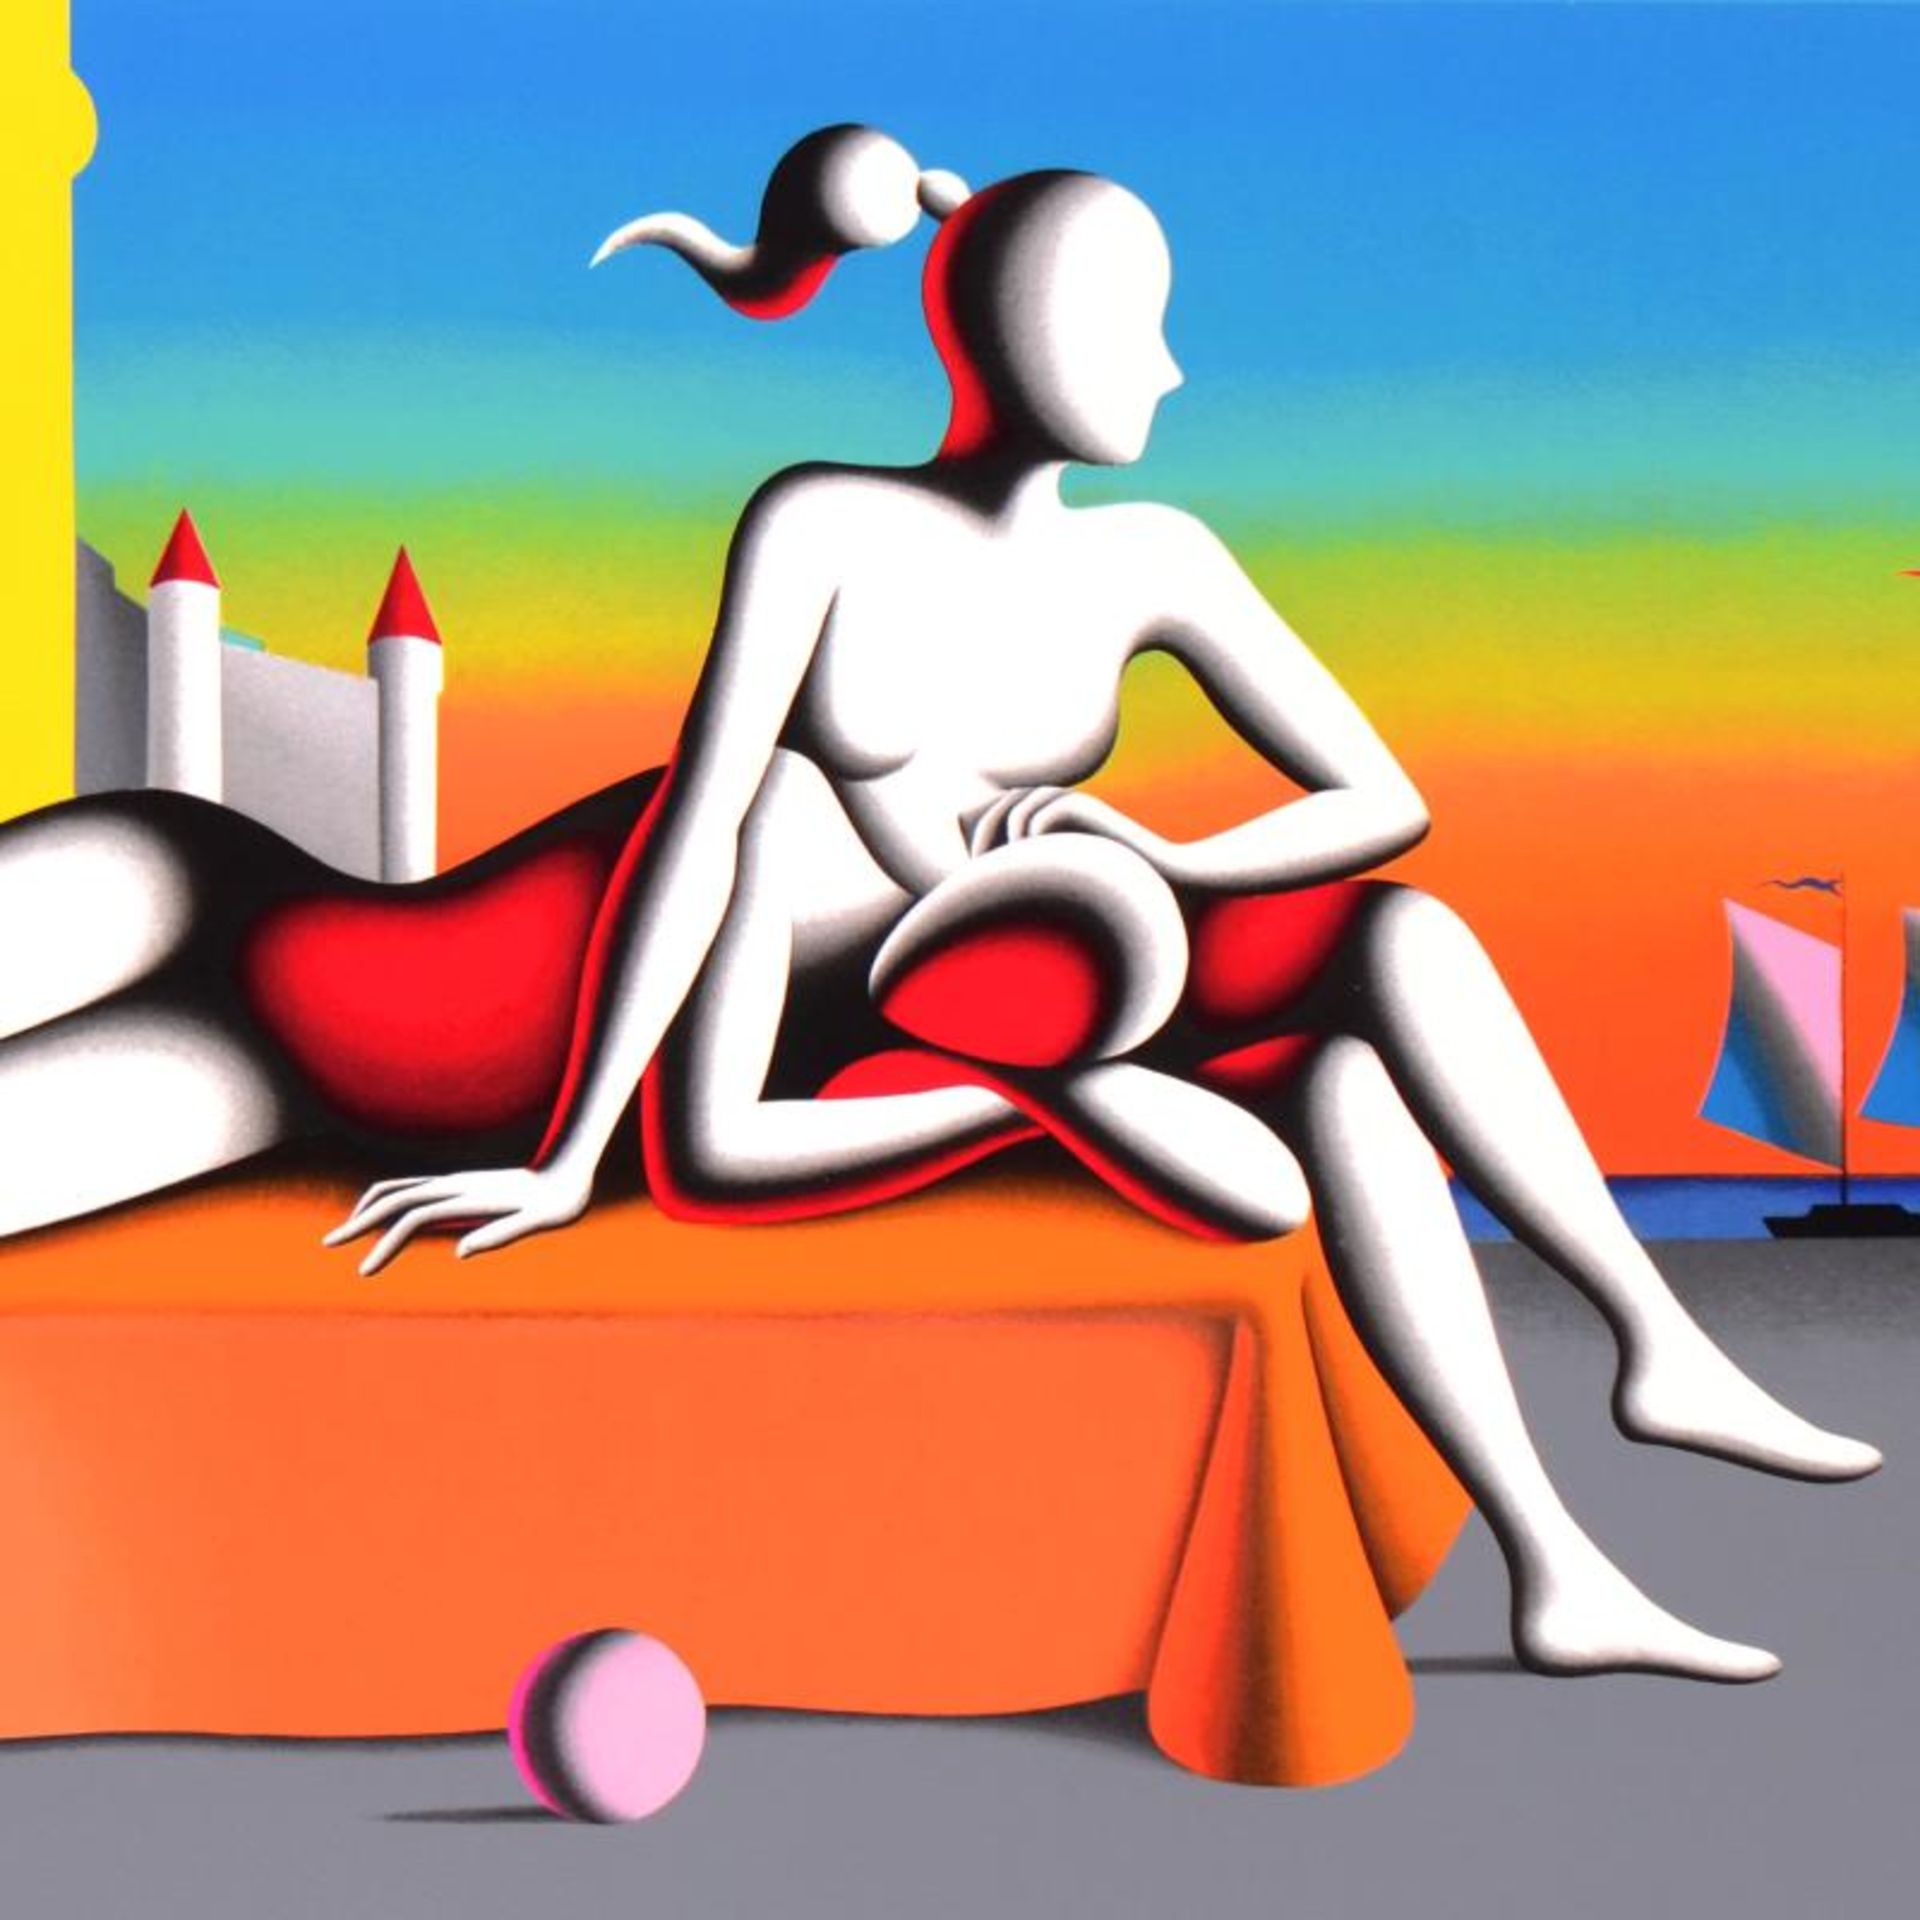 Mark Kostabi, "Beyond Forever" Limited Edition Serigraph, Numbered and Hand Sign - Image 2 of 2